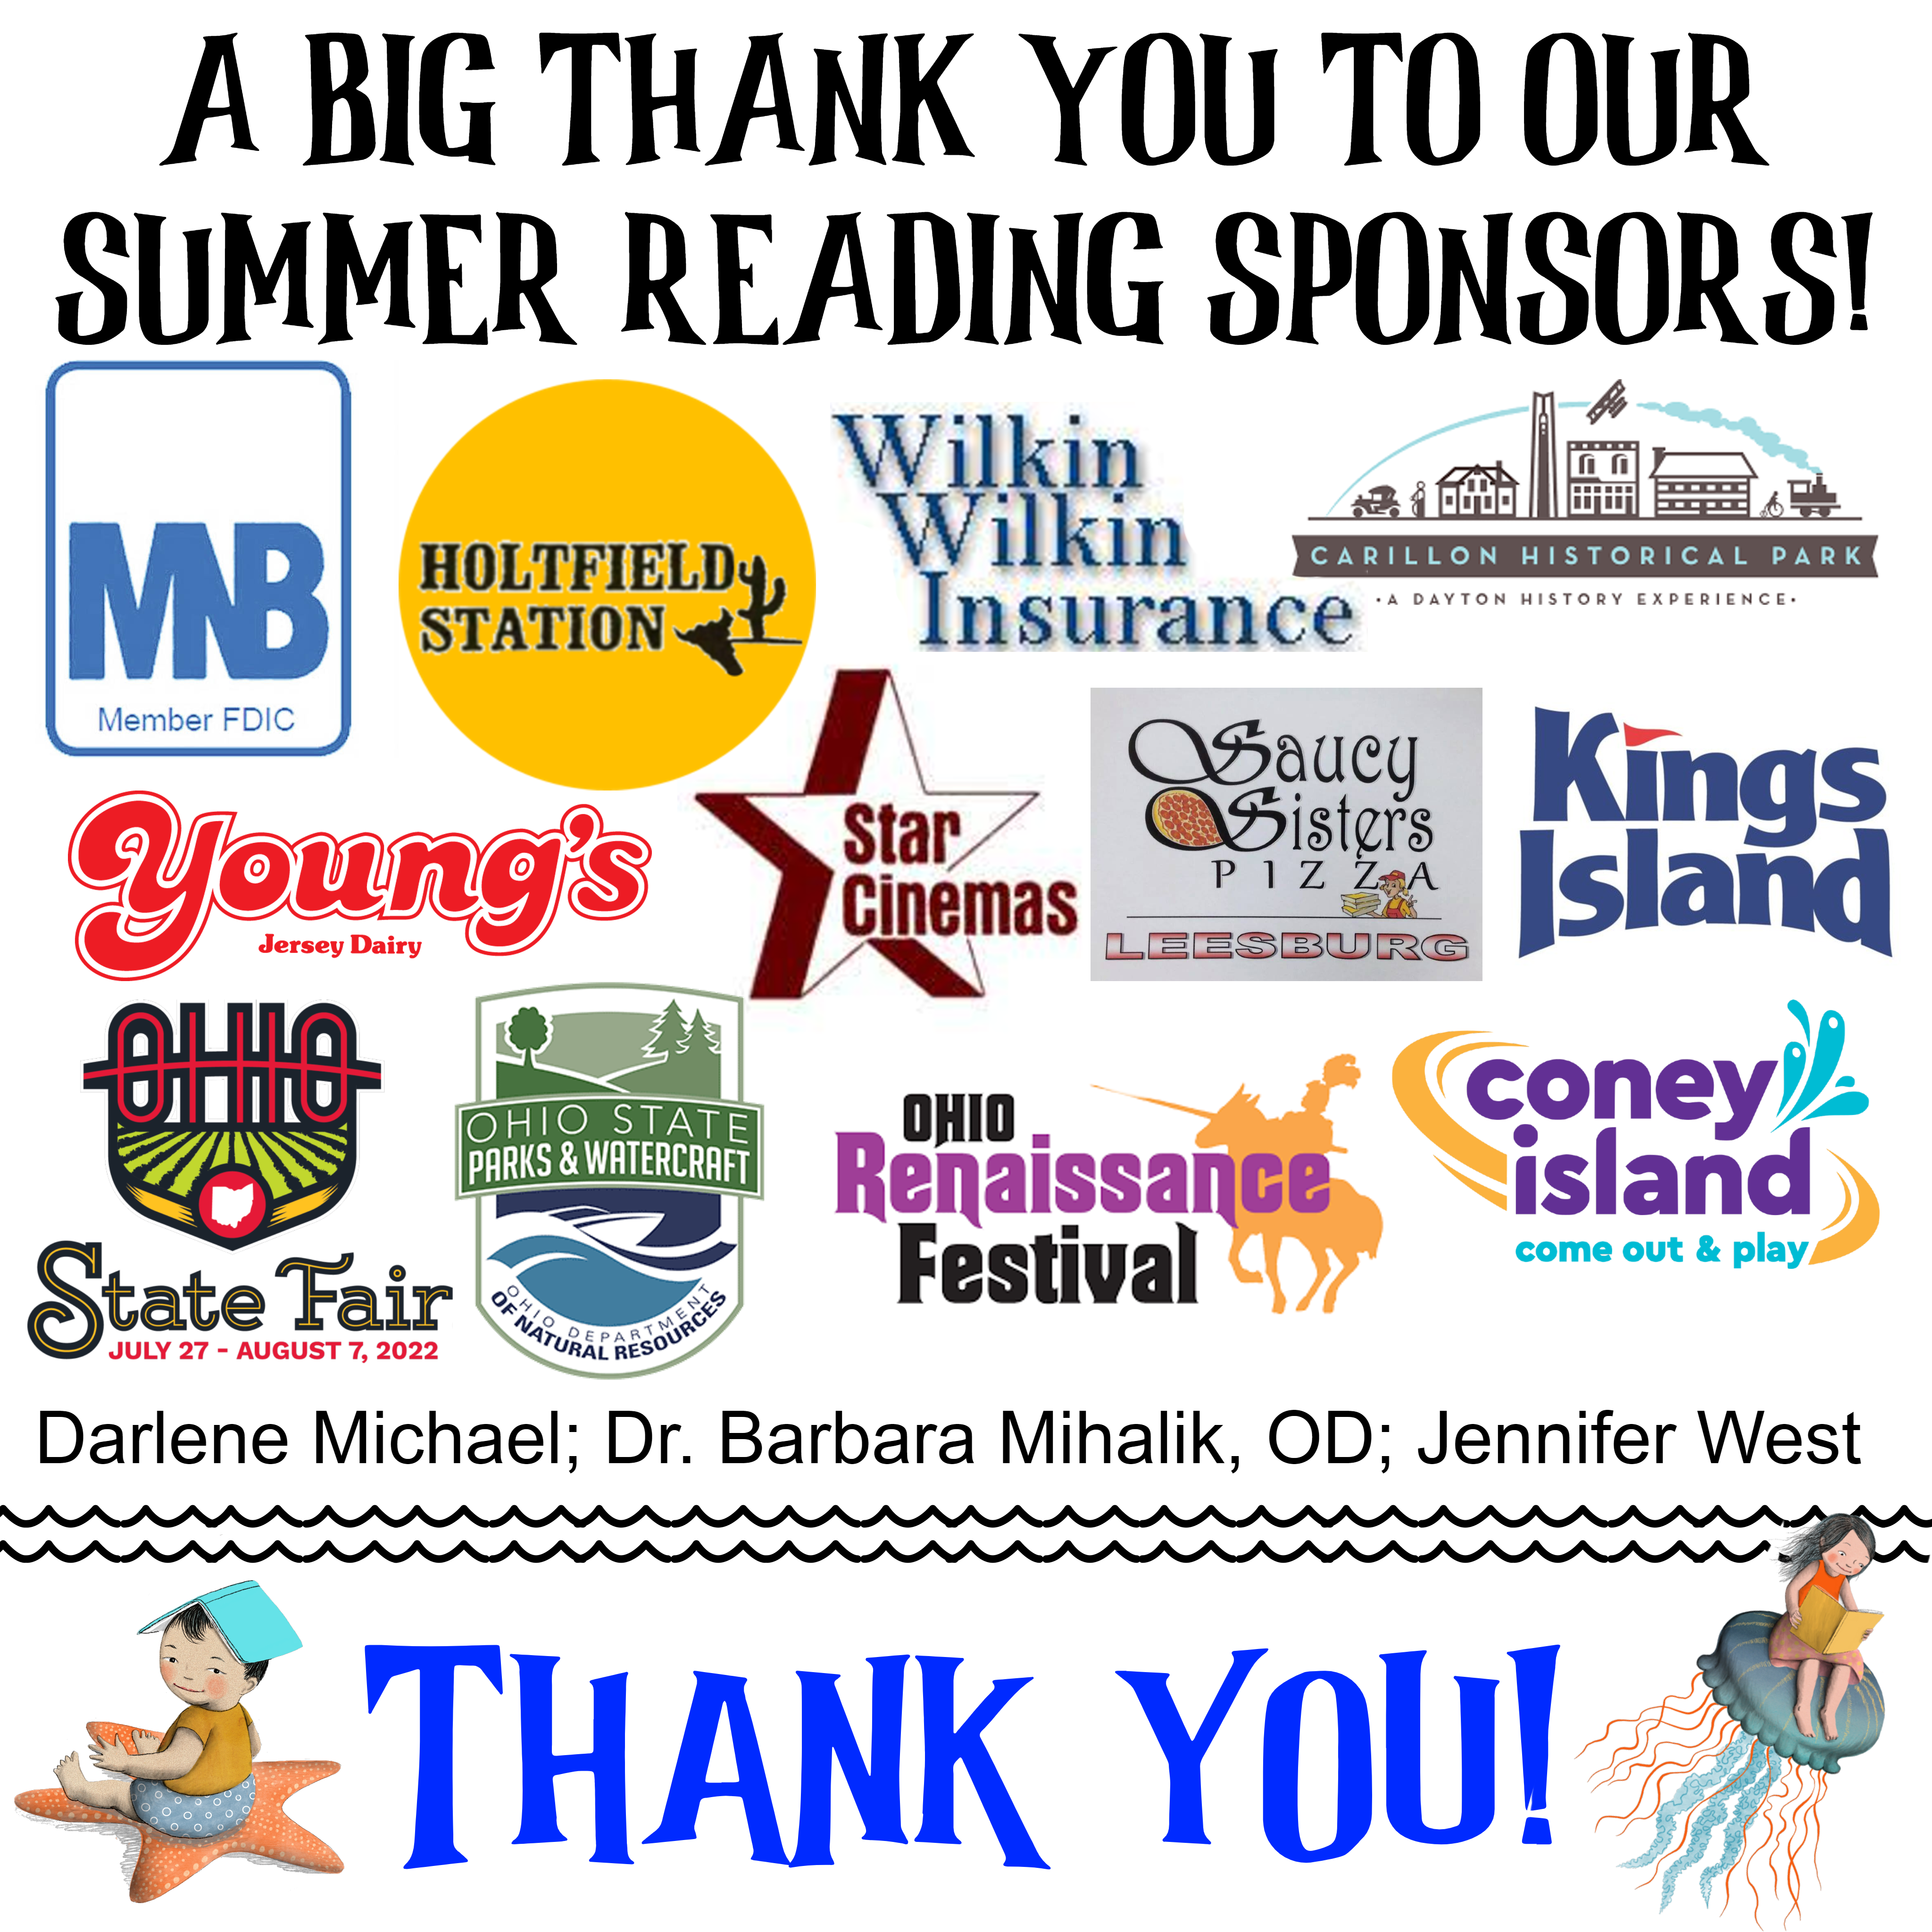 A big thank you to our sponsors!